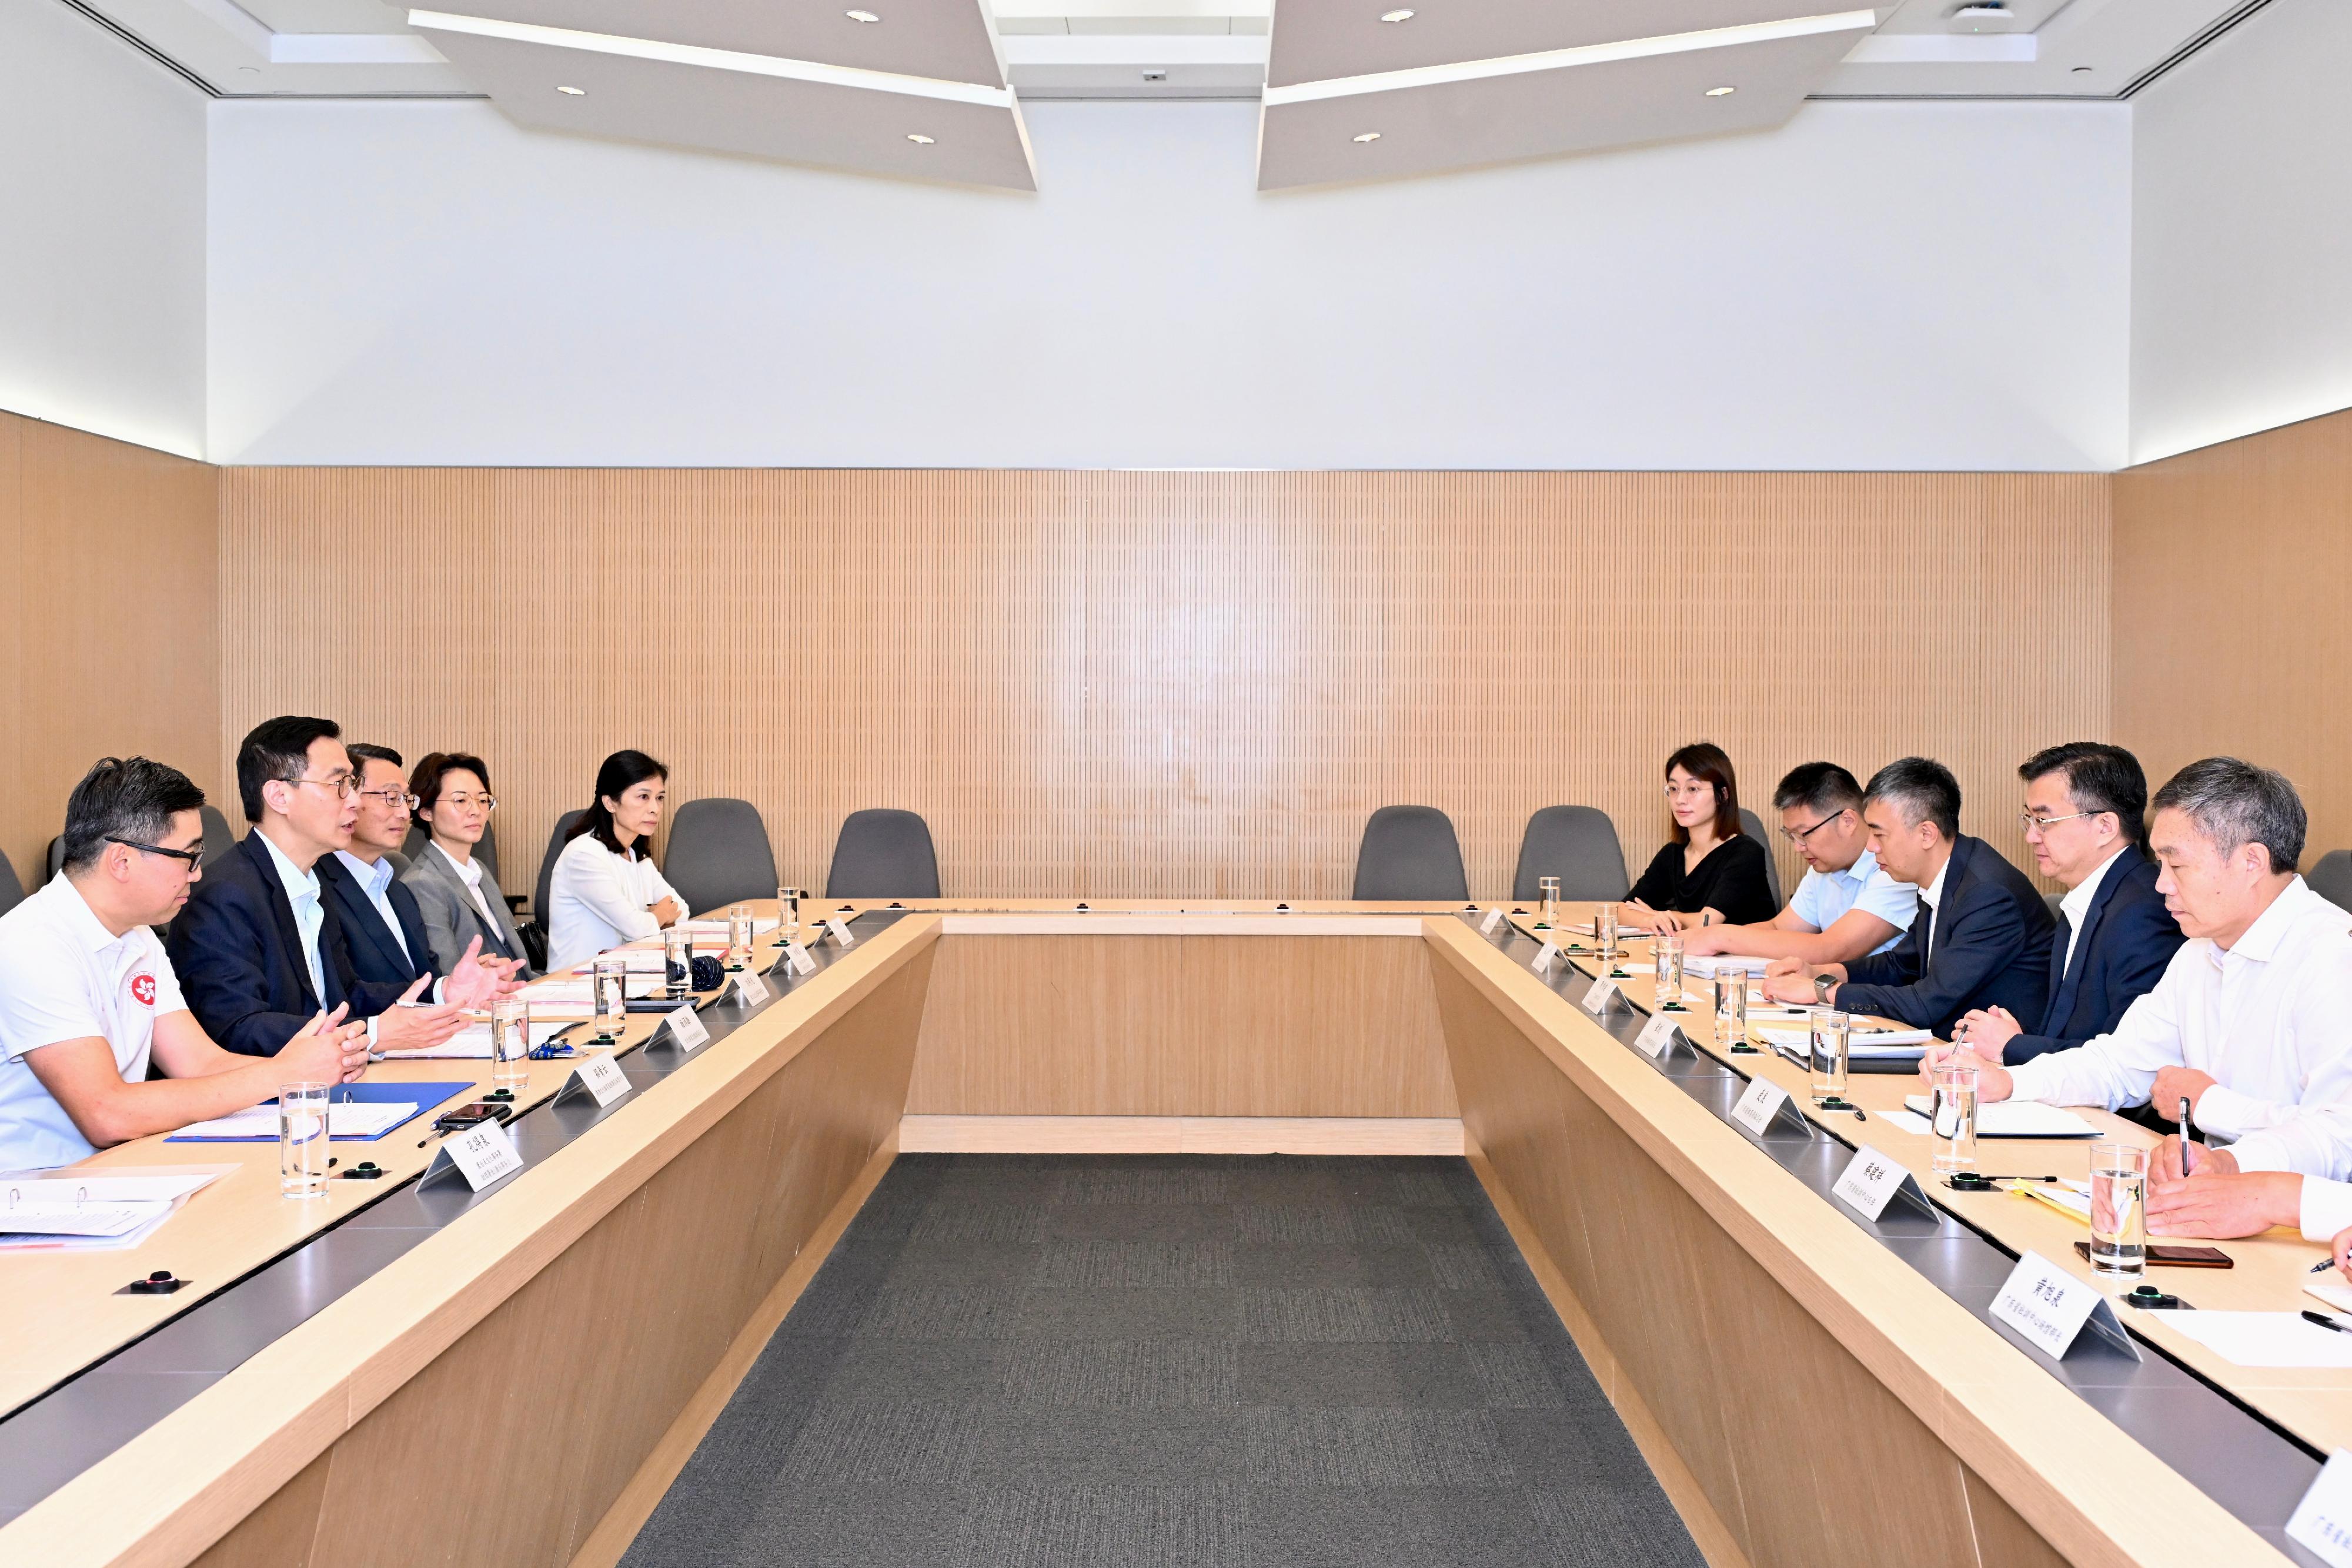 The Secretary for Culture, Sports and Tourism, Mr Kevin Yeung (second left), today (June 30) met with the Head of the Sports Bureau of Guangdong Province, Mr Cui Jian (second right). Photo shows officials exchanging views on the preparatory work of the 15th National Games to be co-hosted by the Guangdong, Hong Kong and Macao authorities as well as the collaboration between Hong Kong and Guangdong on the sports front.